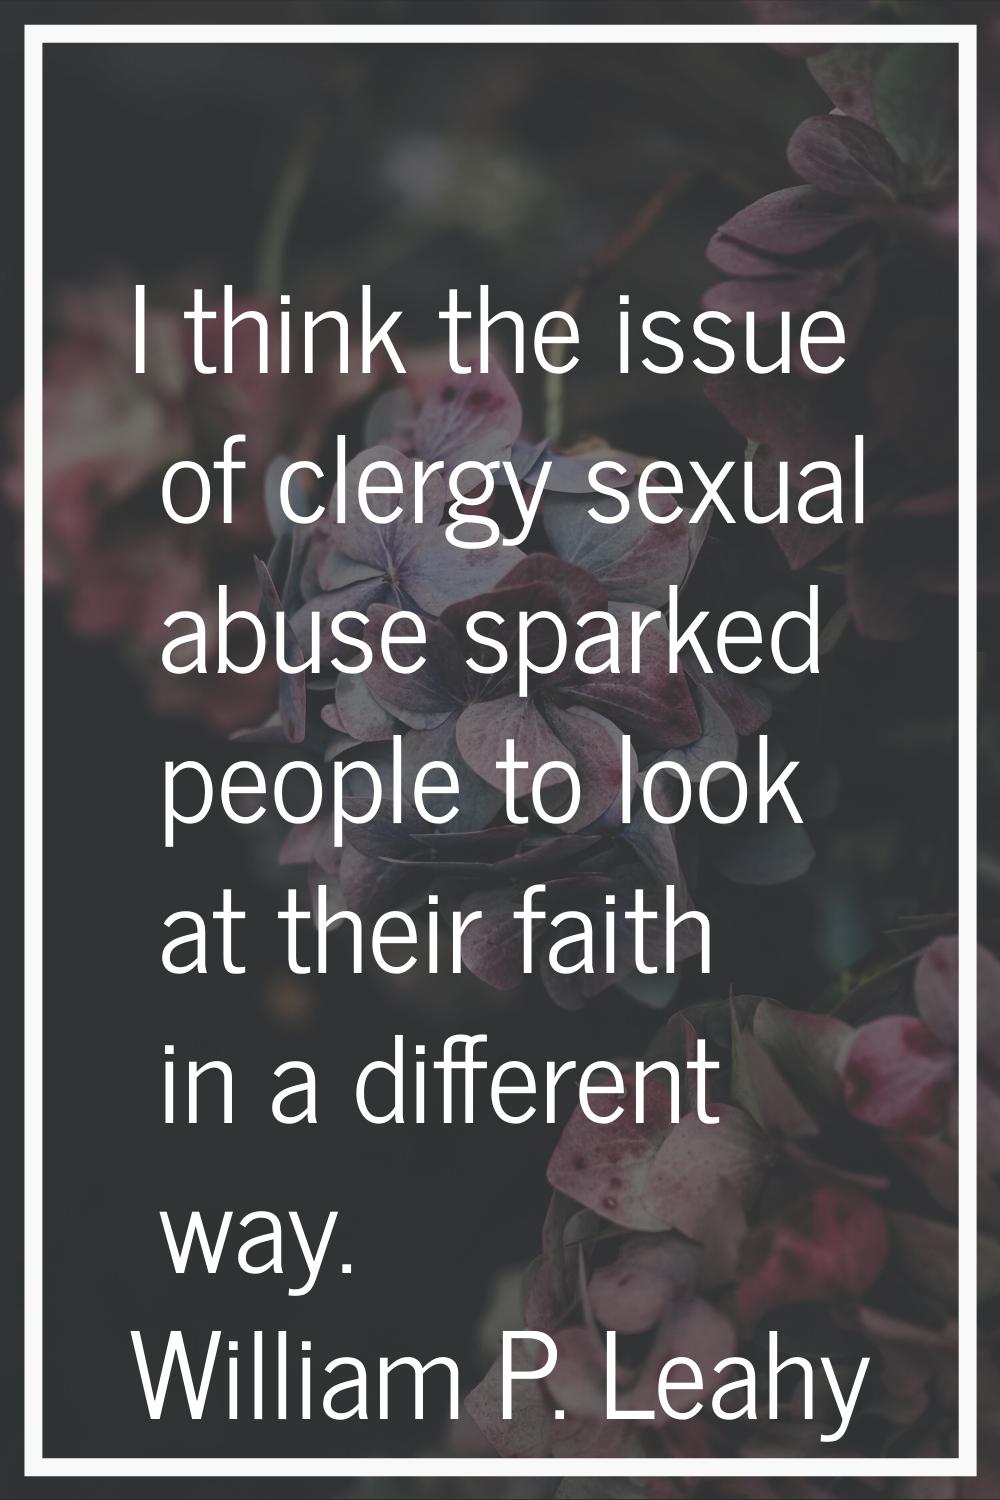 I think the issue of clergy sexual abuse sparked people to look at their faith in a different way.